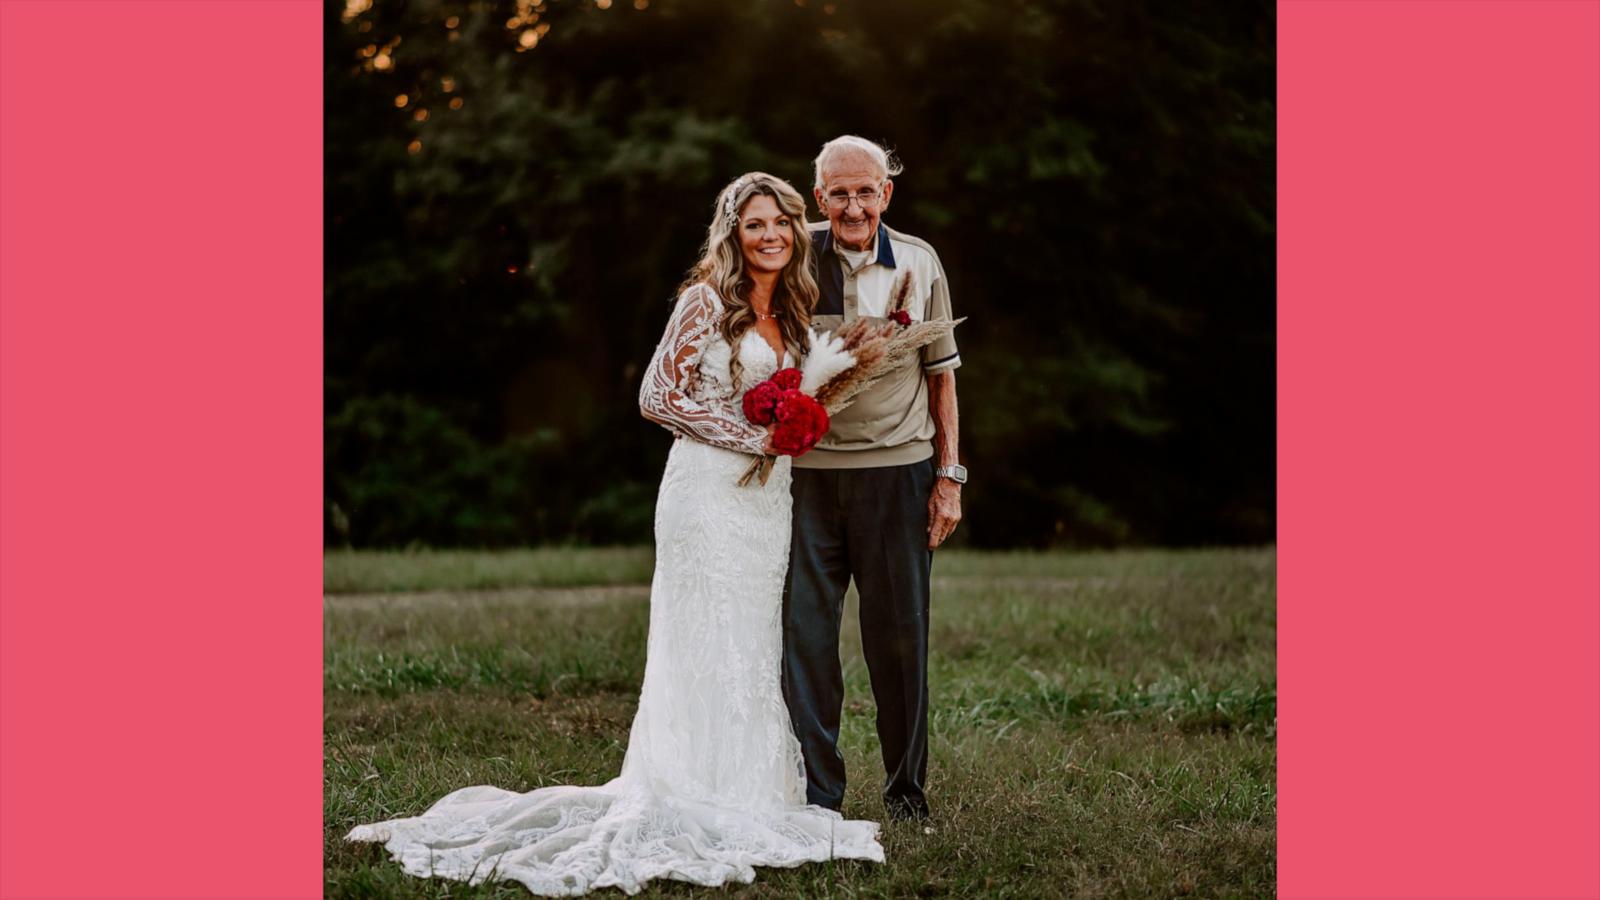 VIDEO: 94-year-old grandpa grows all the flowers for granddaughter’s wedding